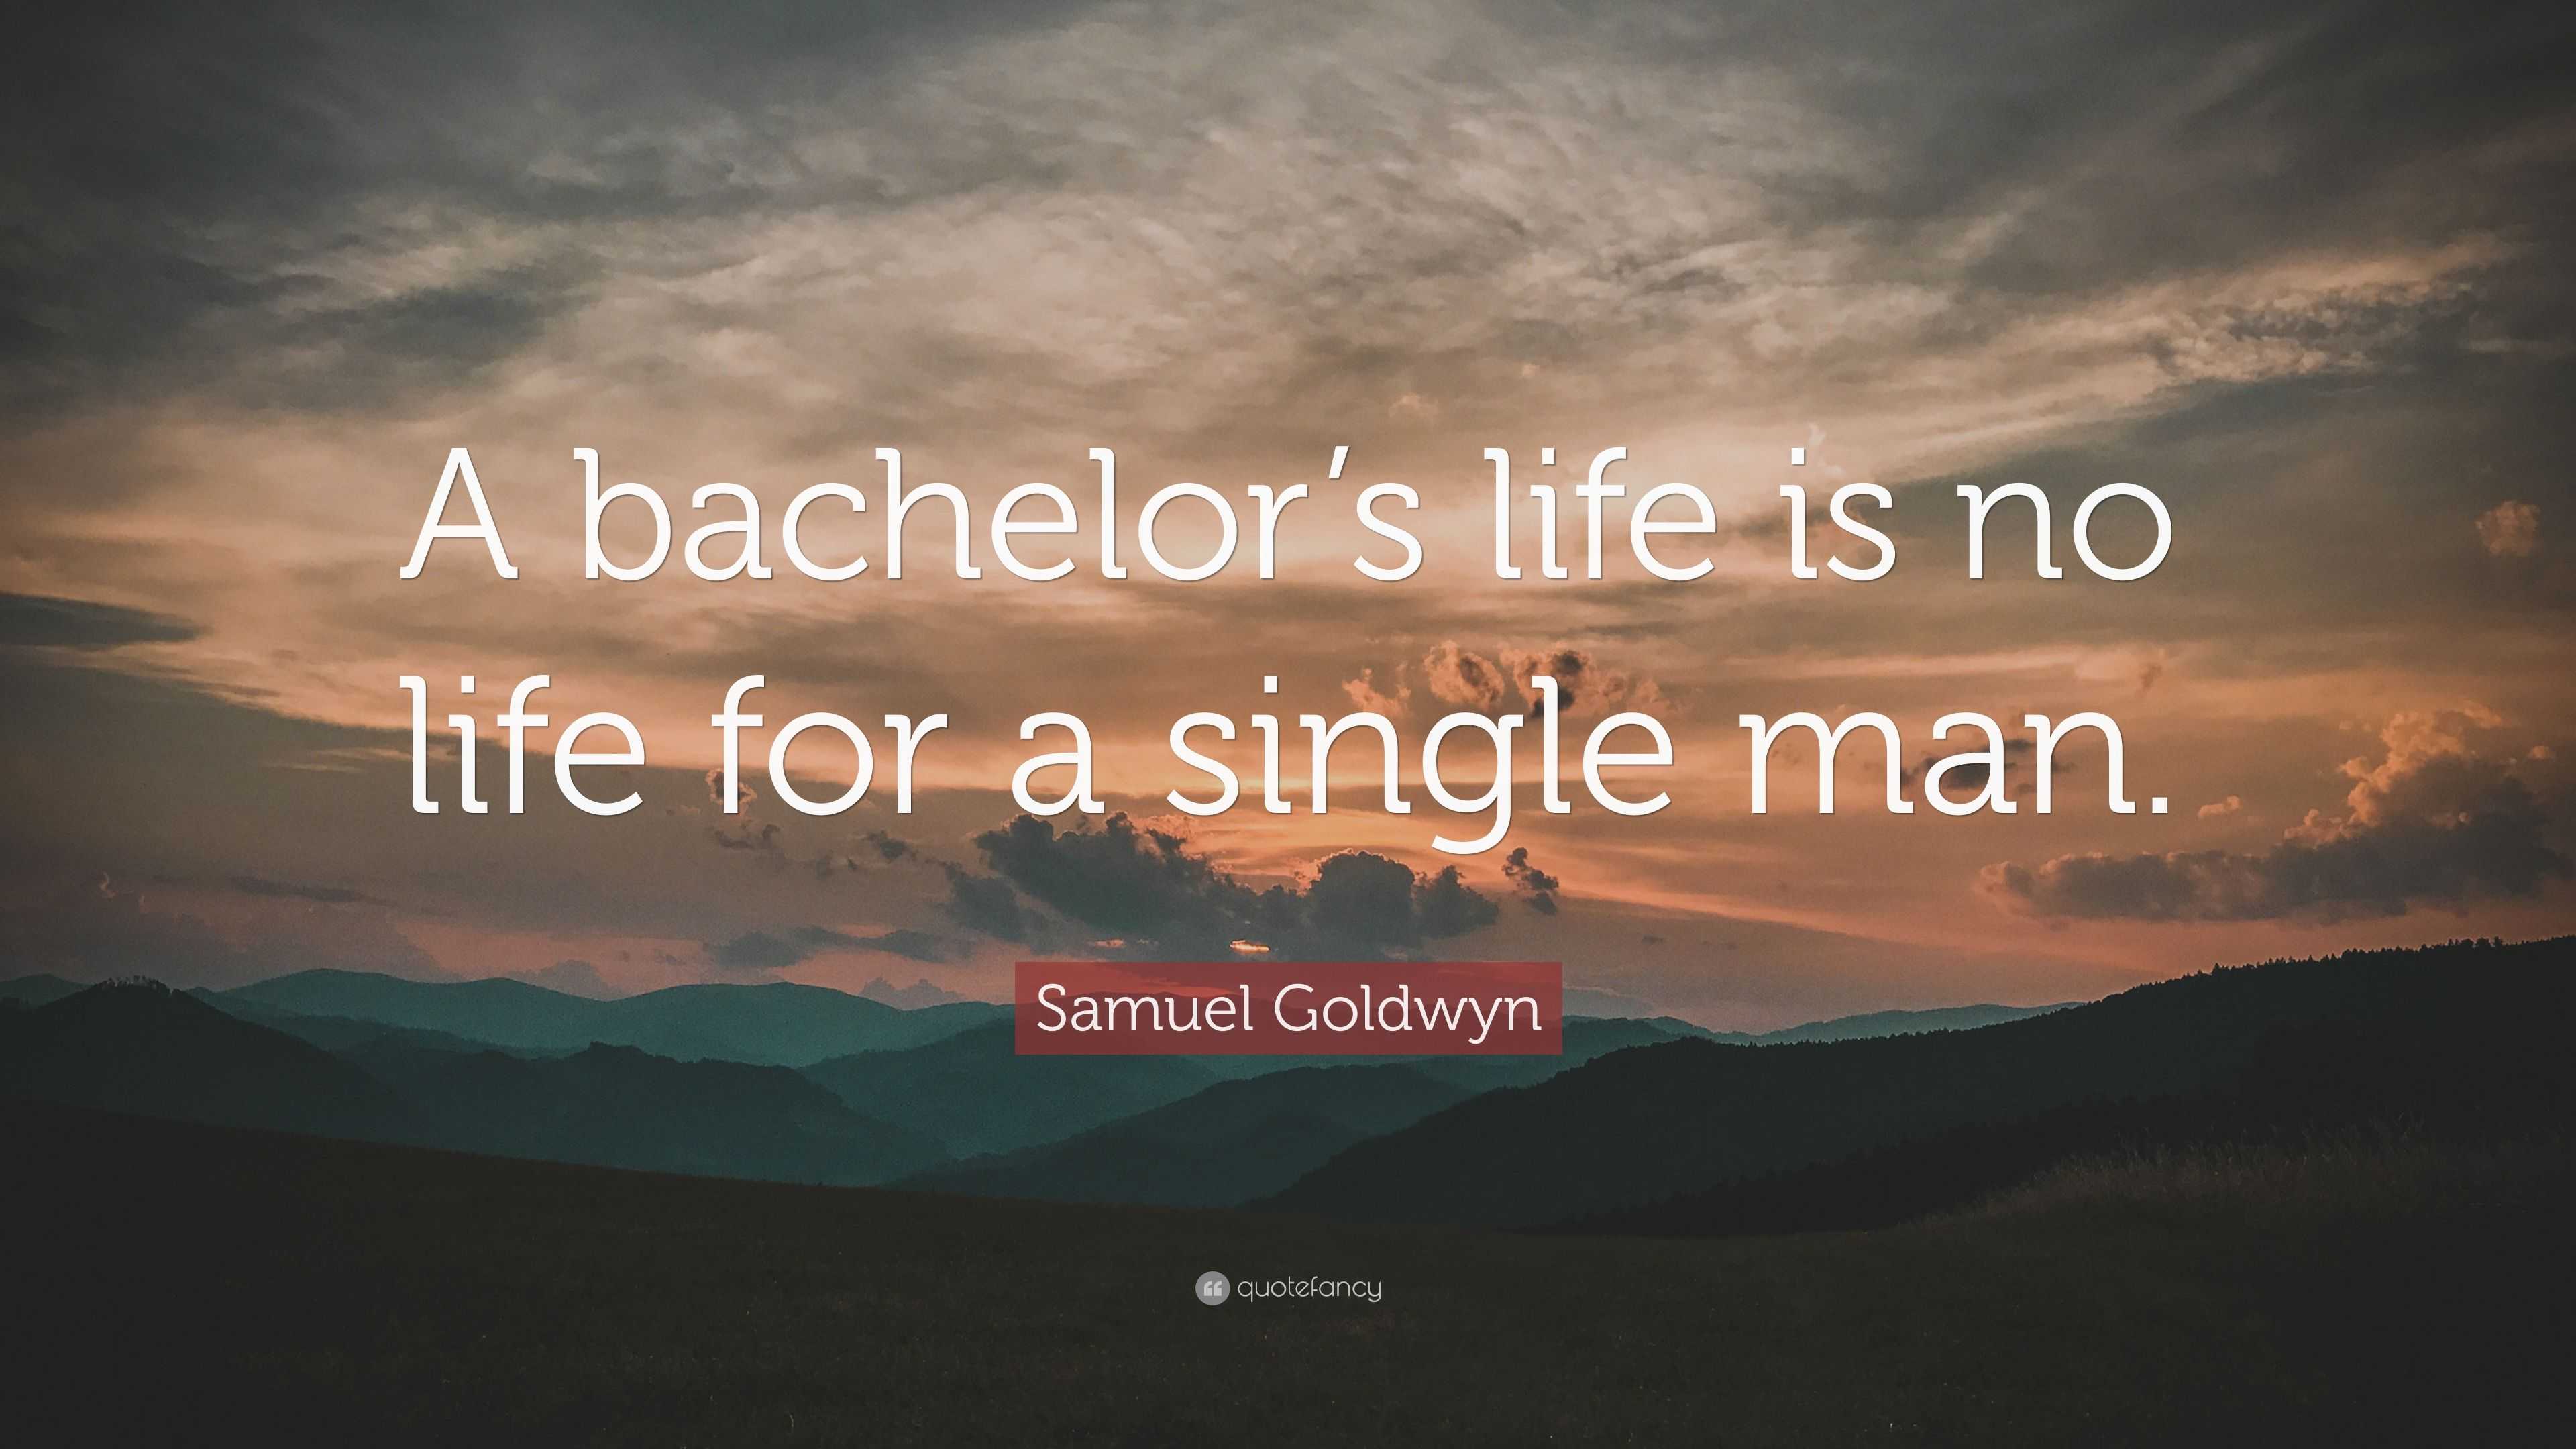 Why is a single man called a bachelor?